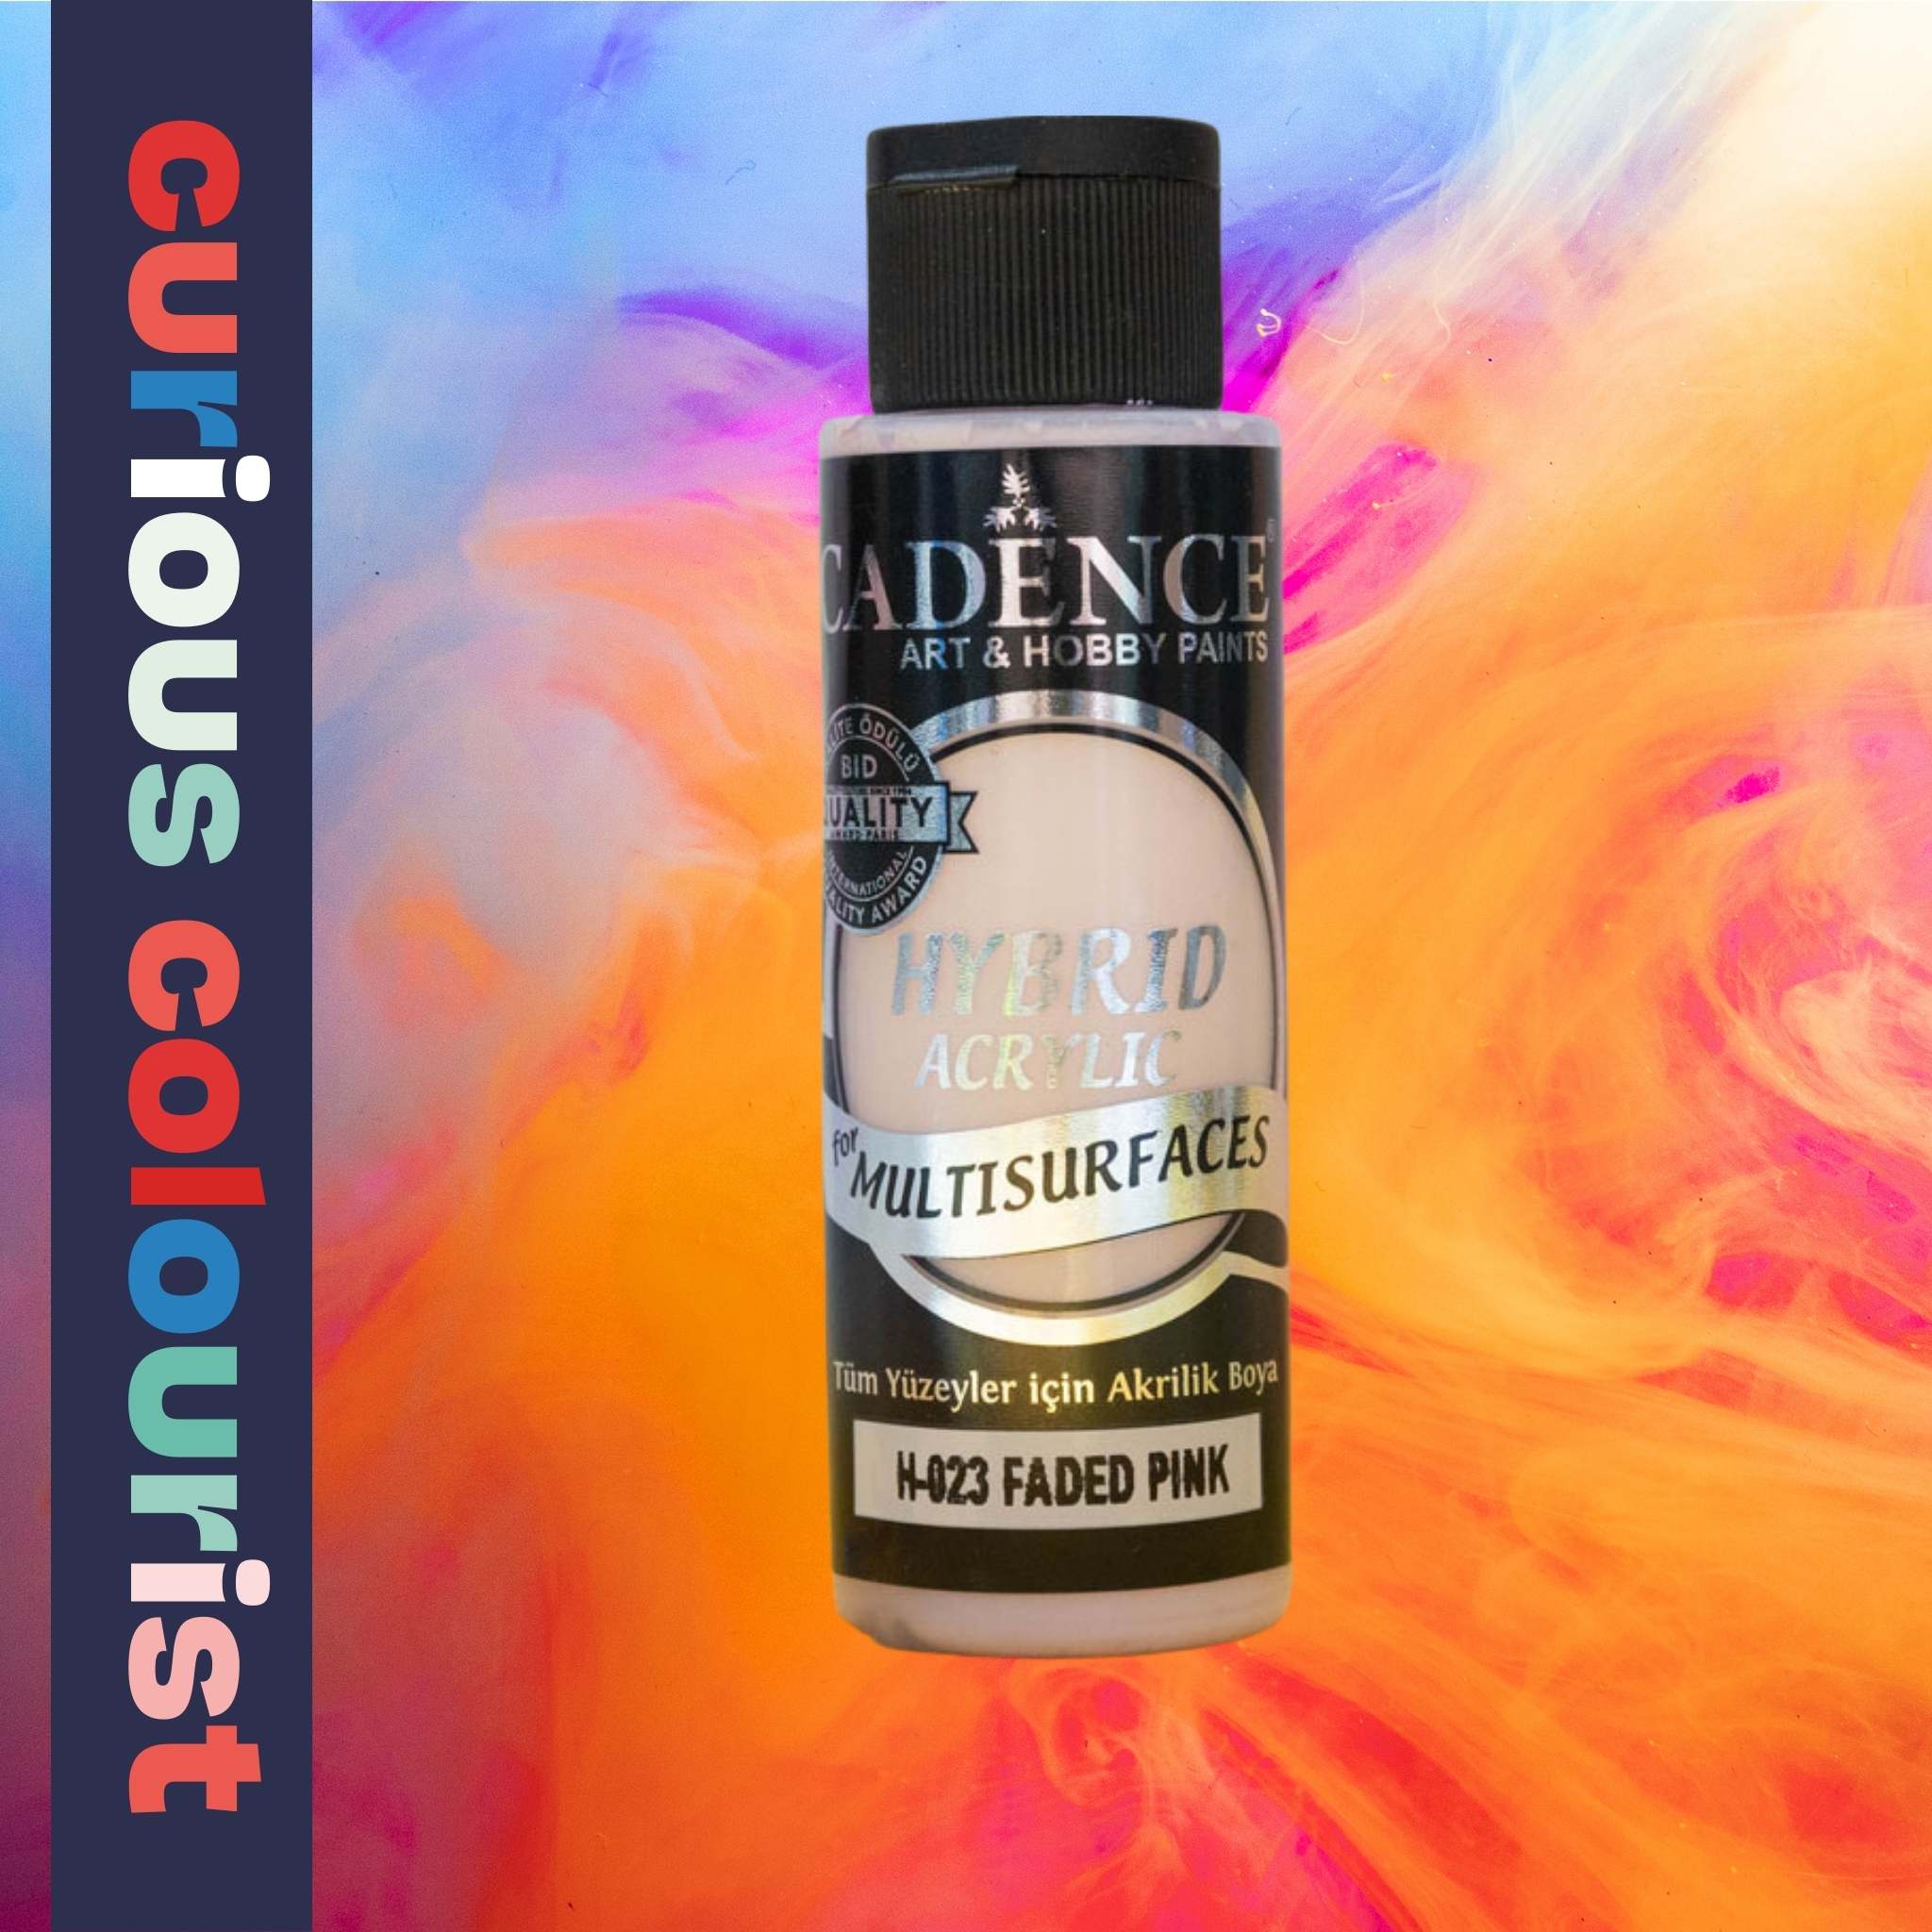 Make your leather craft a work of art with Hybrid Paint. This leathercraft paint is perfect for adding custom colour and decorating your leather creations. Get creative and get crafty - your leather masterpieces await!